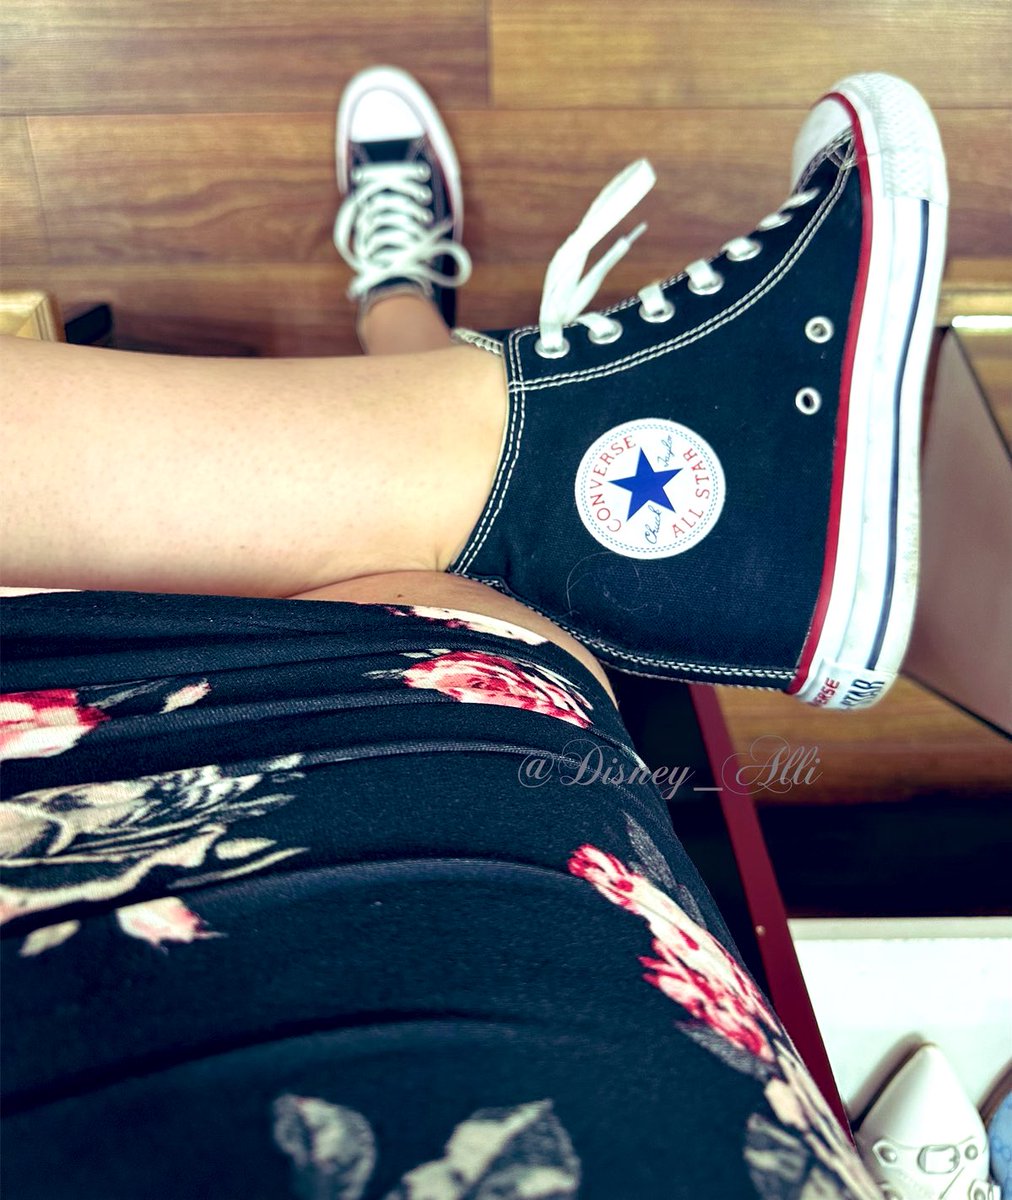 Even “sport mode” means wedge @Converse for me #wedgesneakers #hiddenwedges #sportmodeactived #casualstyle #shoes #shoefie #shoestagram #instastyle